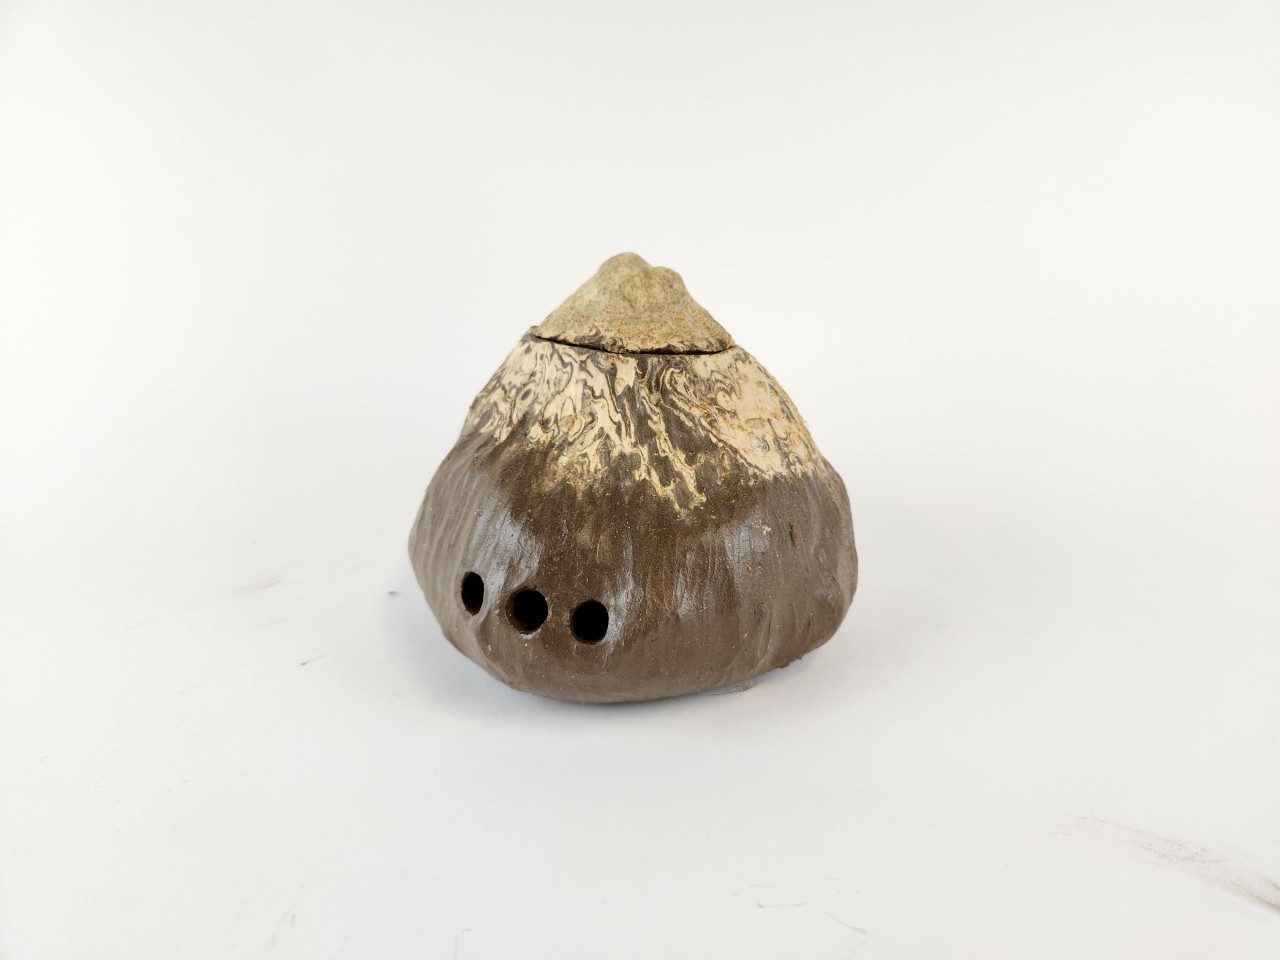 Textured cone shaped brown and beige ceramic vessel, on white background